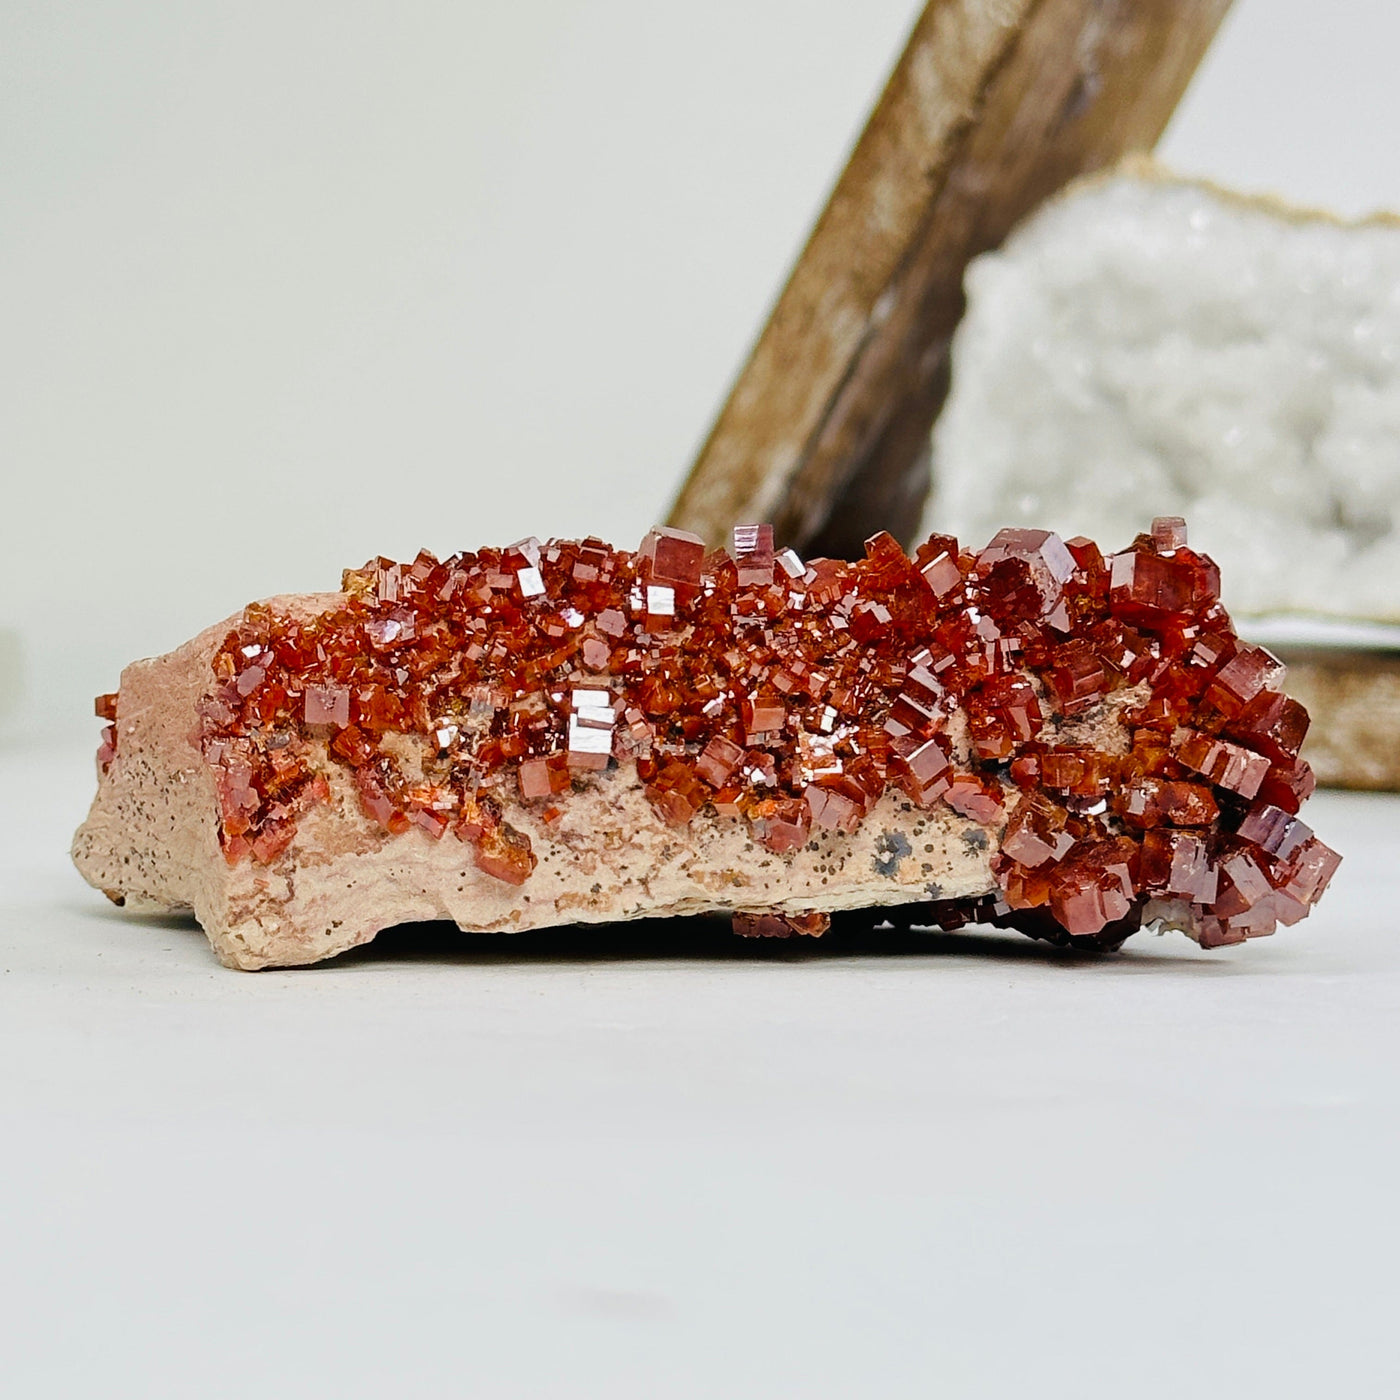 vanadinite with decorations in the background